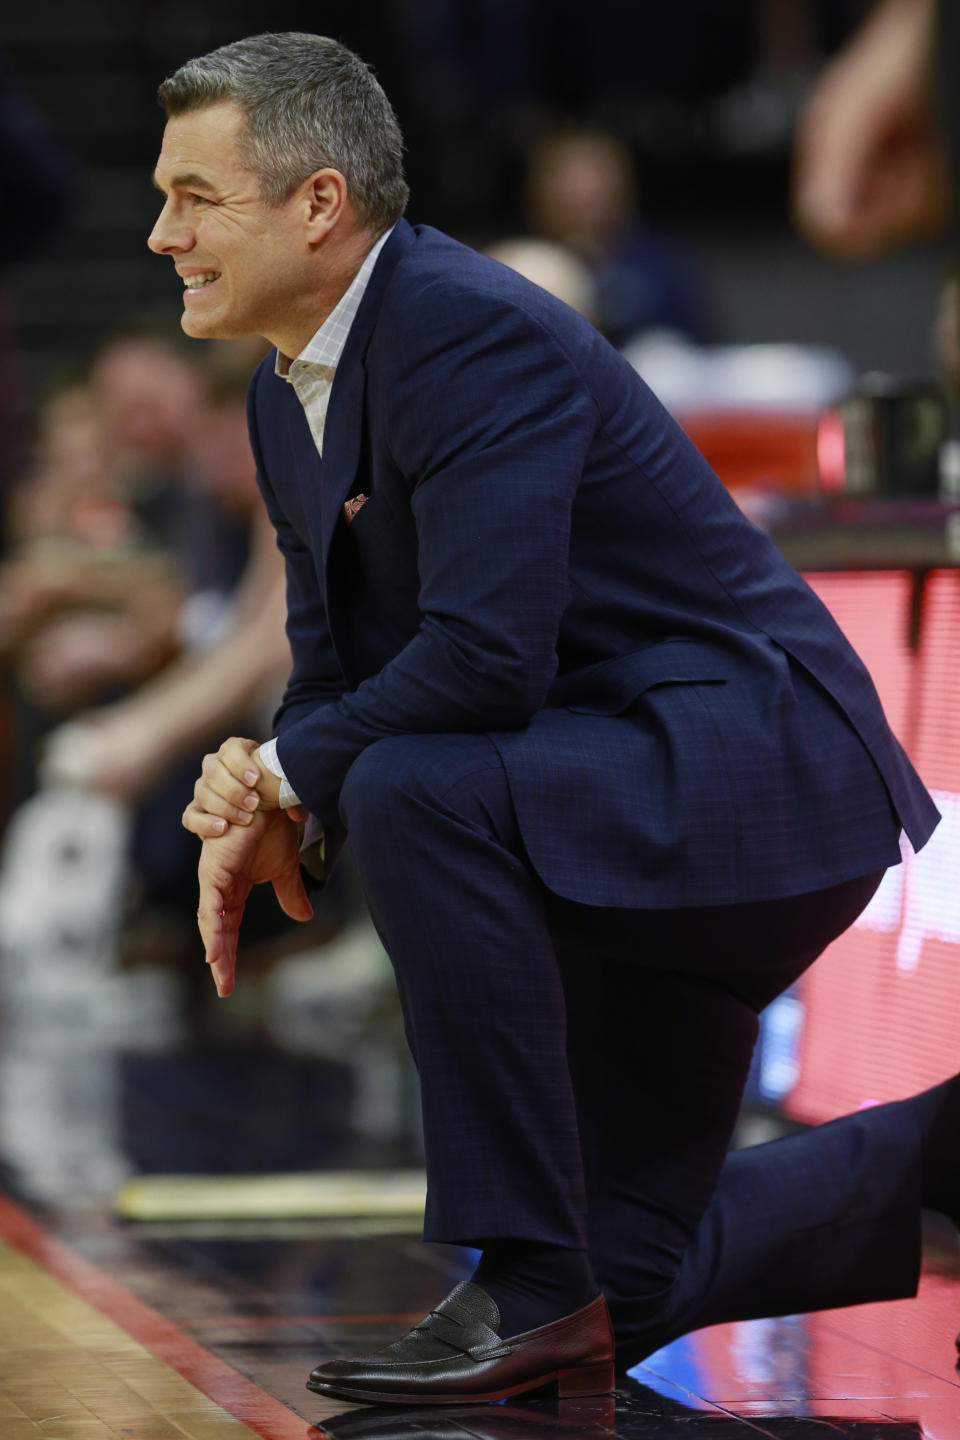 Virginia head coach Tony Bennett watches play during the first half of an NCAA college basketball game against Syracuse in Charlottesville, Va., Saturday, Jan. 11, 2020. (AP Photo/Steve Helber)